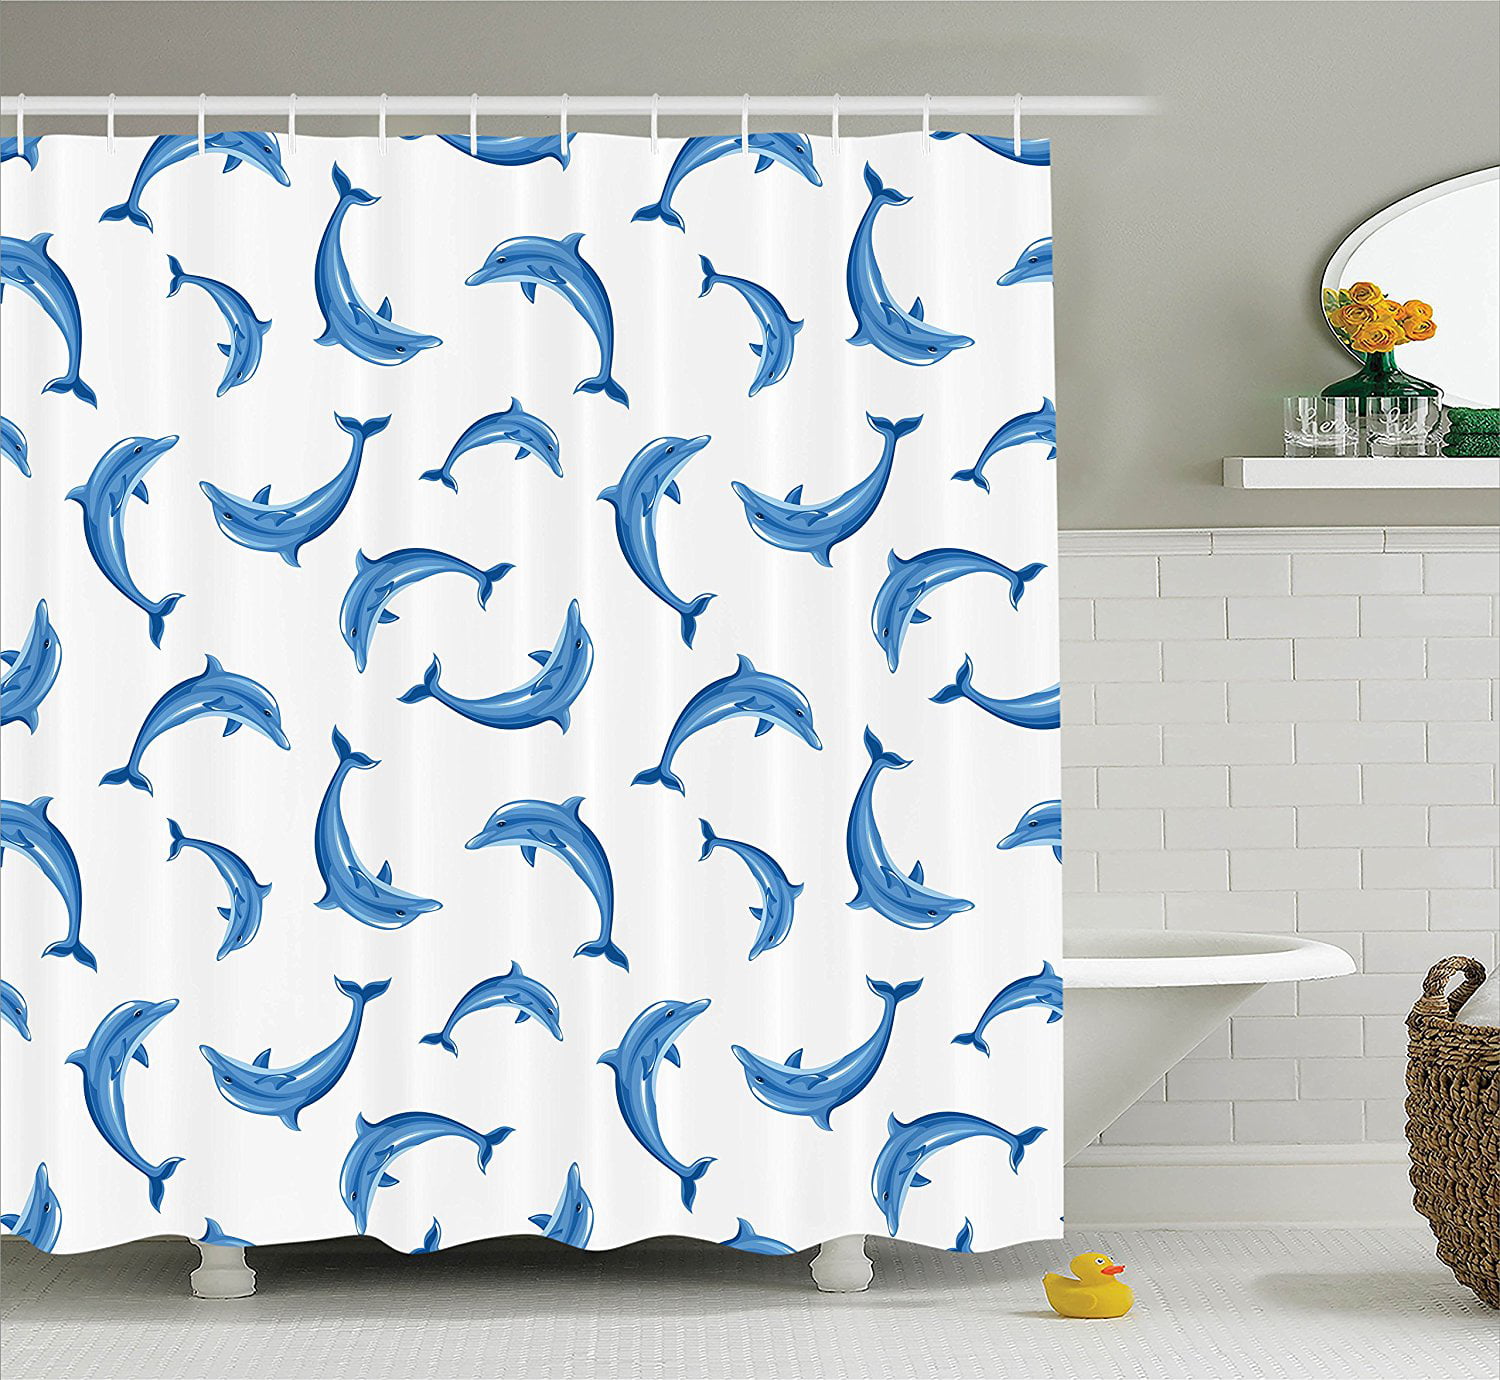 Wildlife Shower Curtain Tropic Animal Collage Print for Bathroom 75 Inches Long 